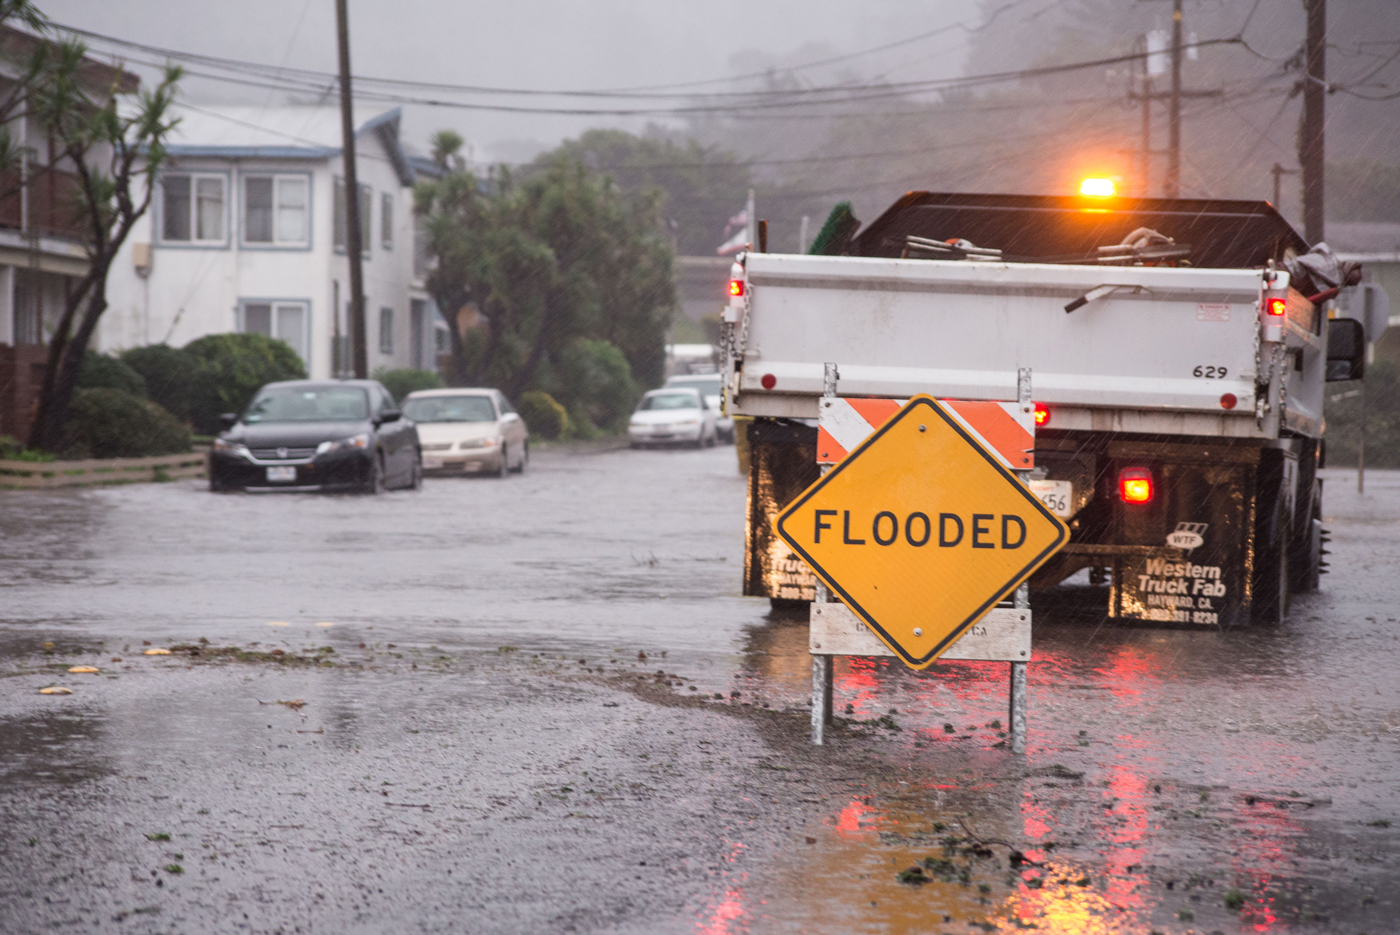 Flooding in Pacifica early Thursday morning on Clarendon Road. (Steve Byrne/KQED)